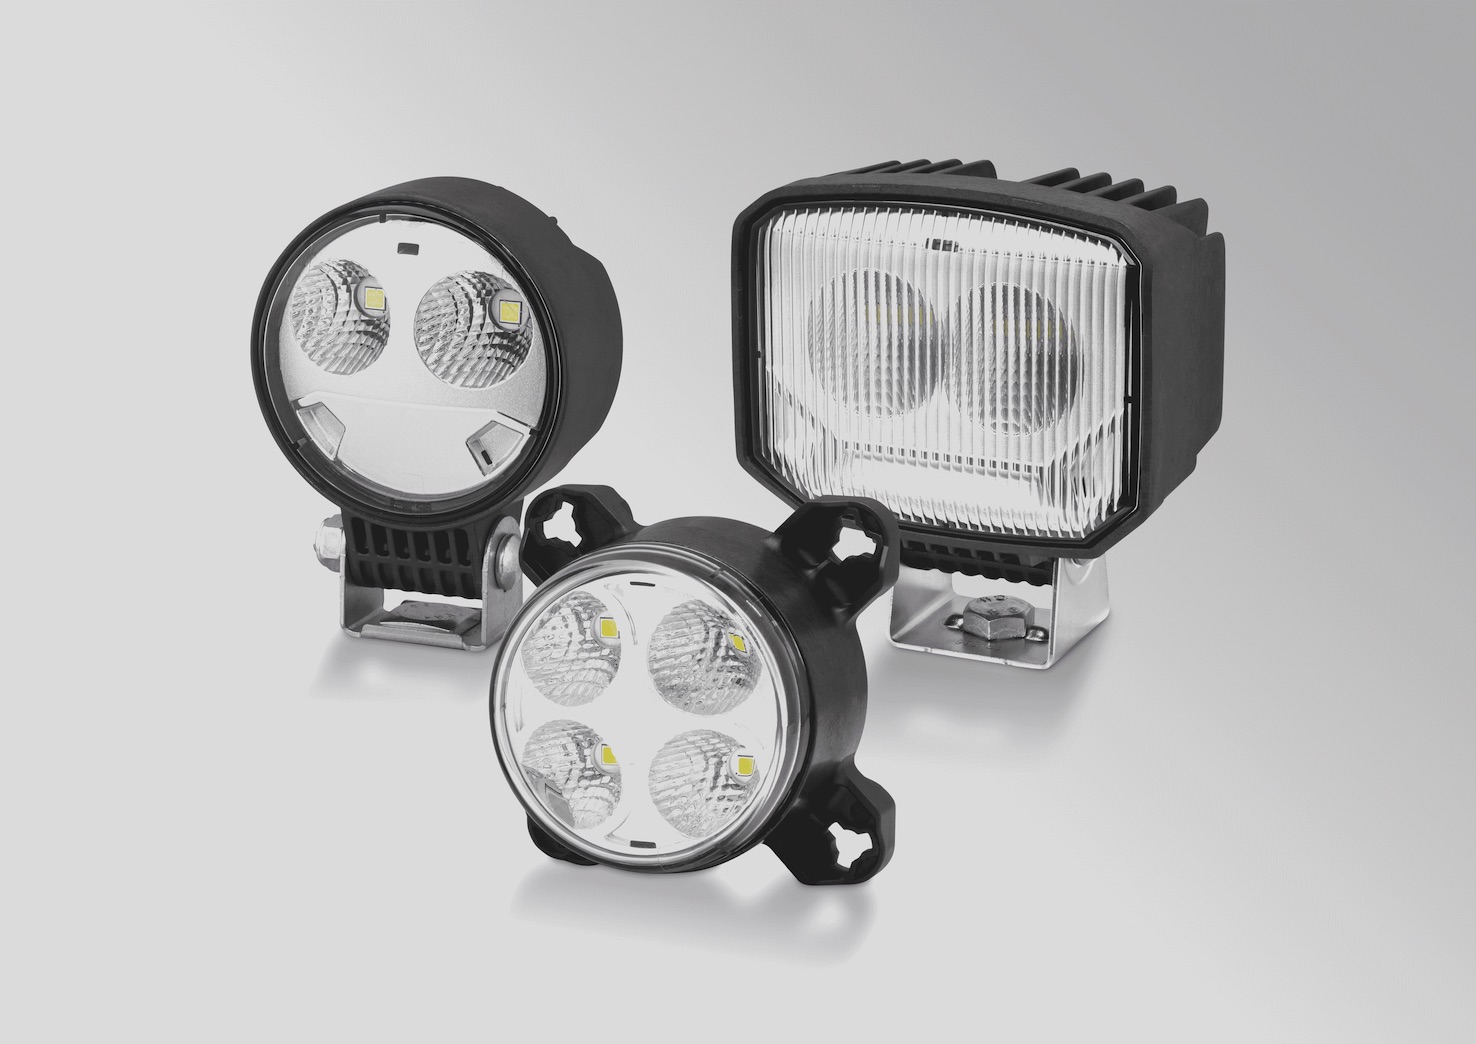 HELLA launches new S-series work lamps